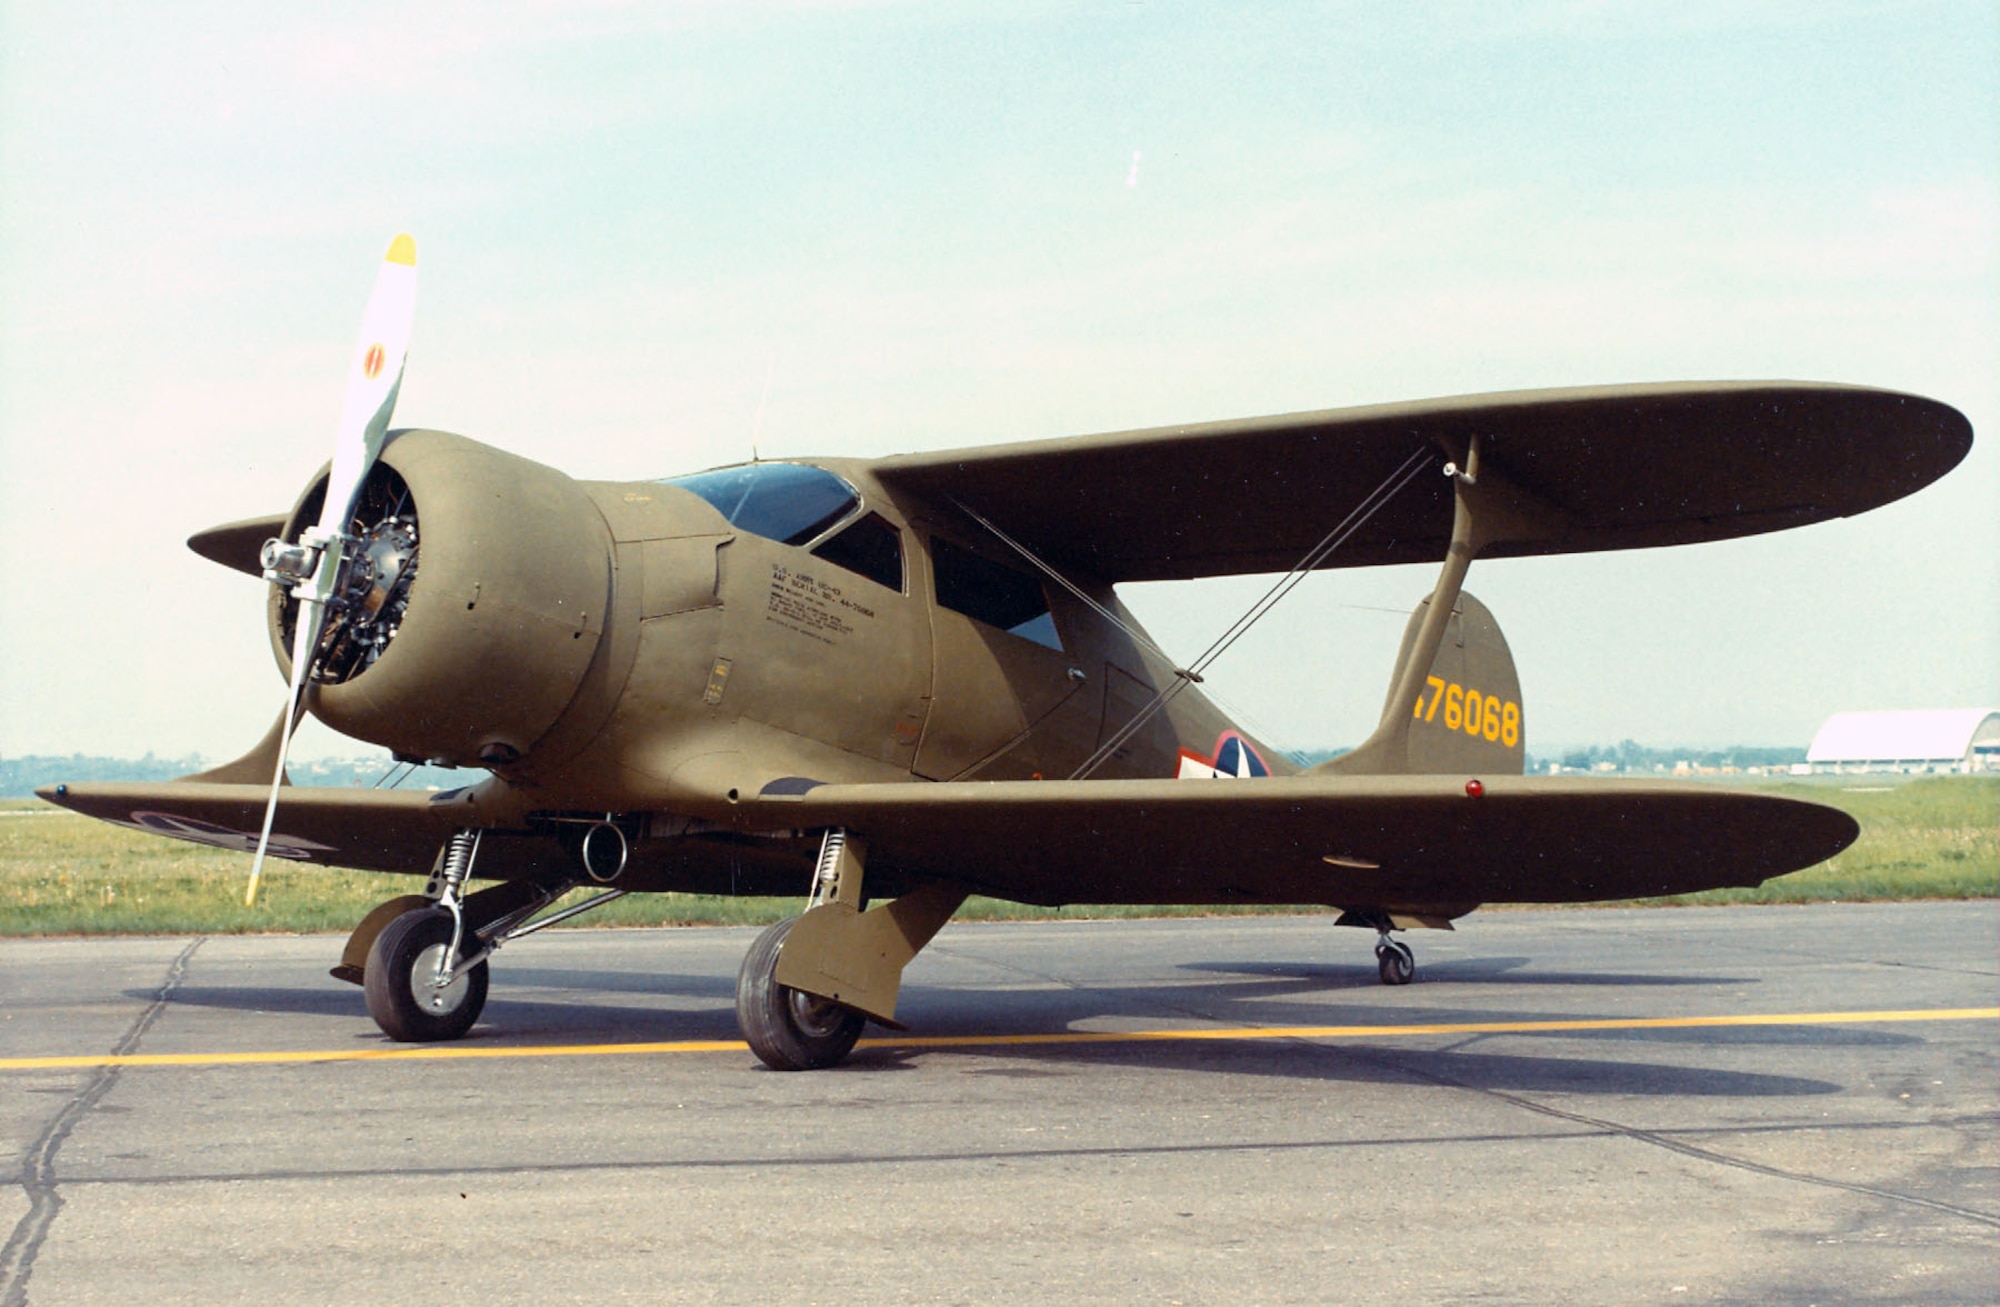 DAYTON, Ohio -- Beech UC-43 Traveler at the National Museum of the United States Air Force. (U.S. Air Force photo)